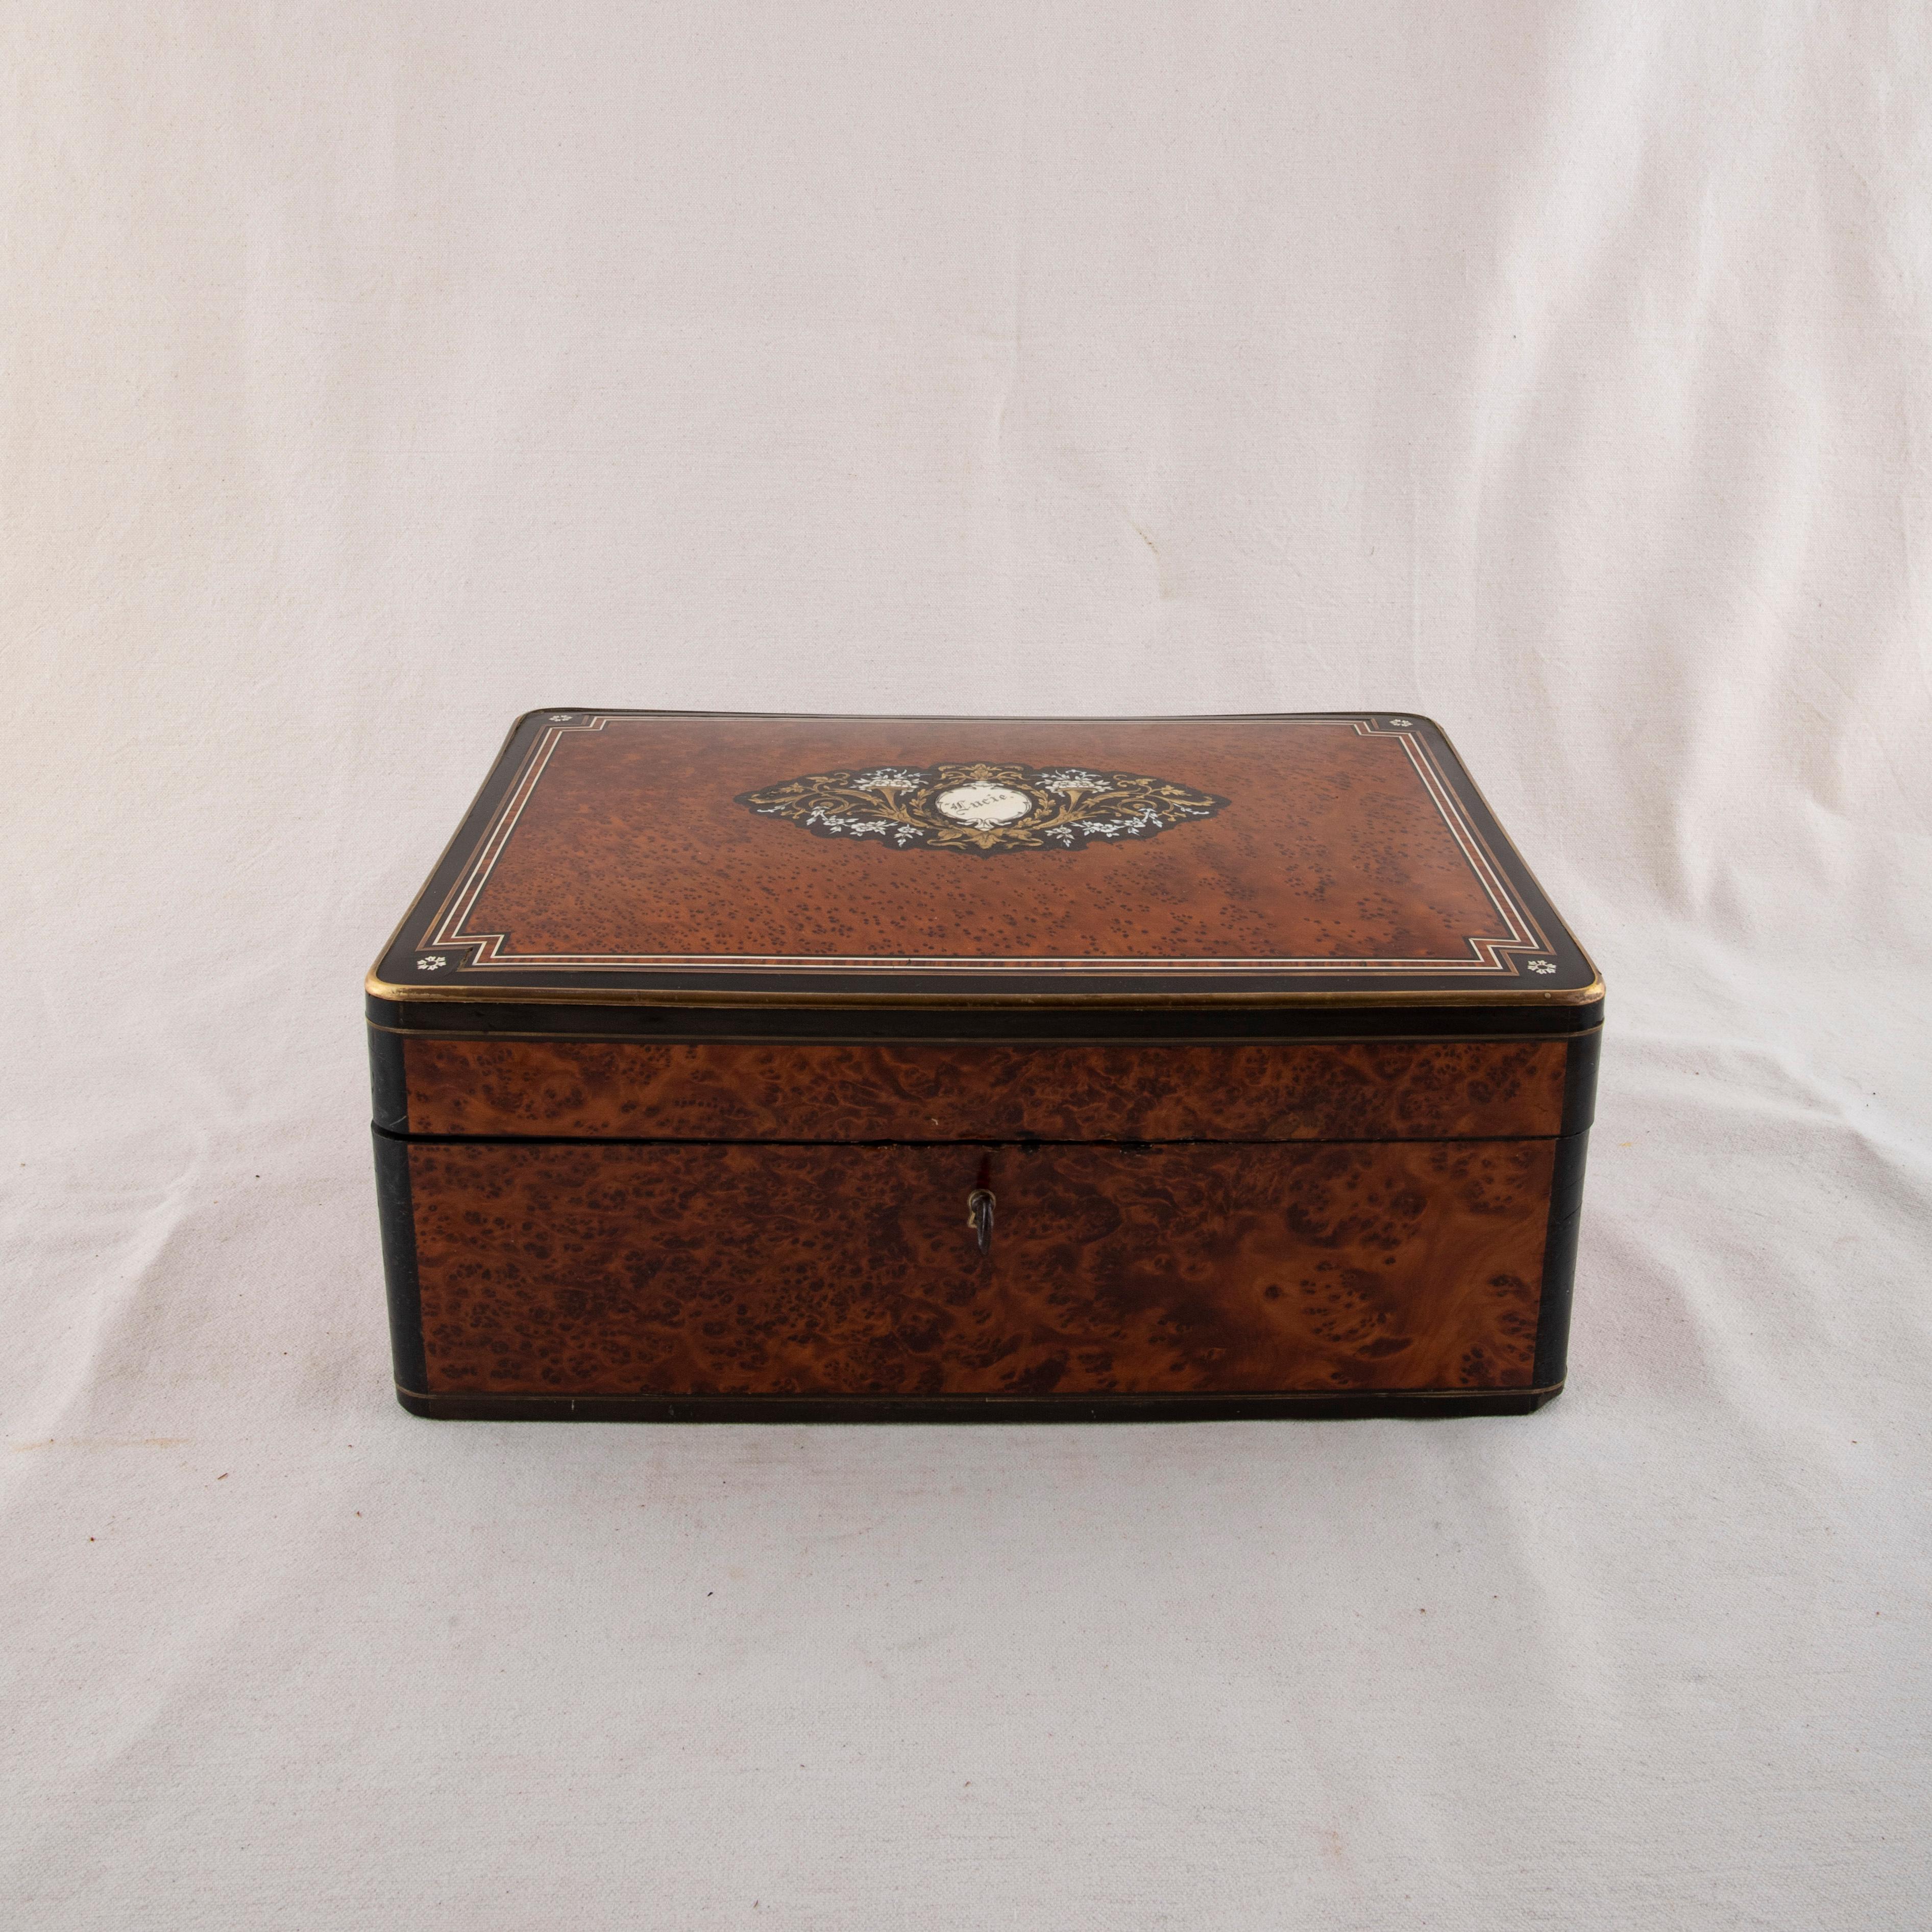 This large mid nineteenth century marquetry box from the Napoleon III period features a burl thuya wood field surrounded by a concentric border of intricately inlaid ebonized pearwood, ivory, and rosewood. An ivory cartouche in the center of the lid